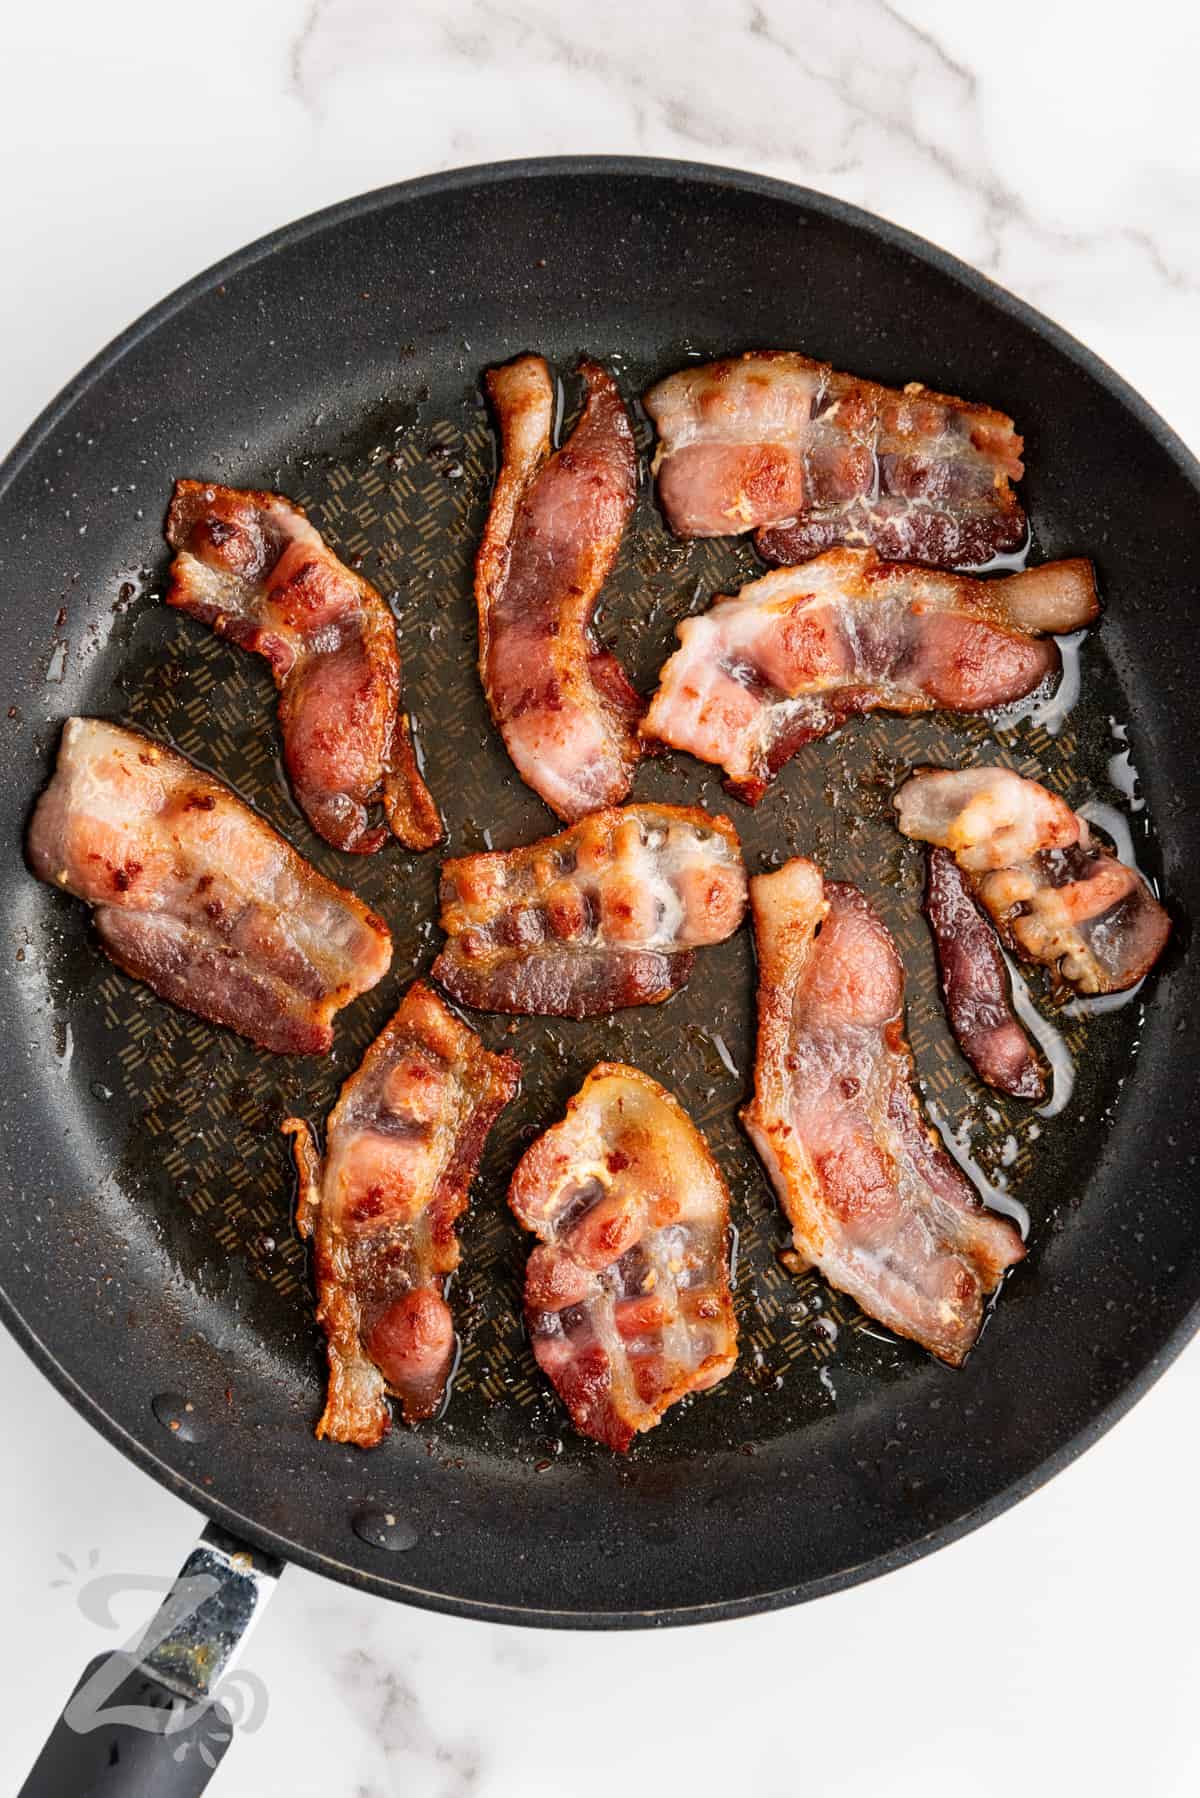 cooking bacon to make Twice Baked Potatoes